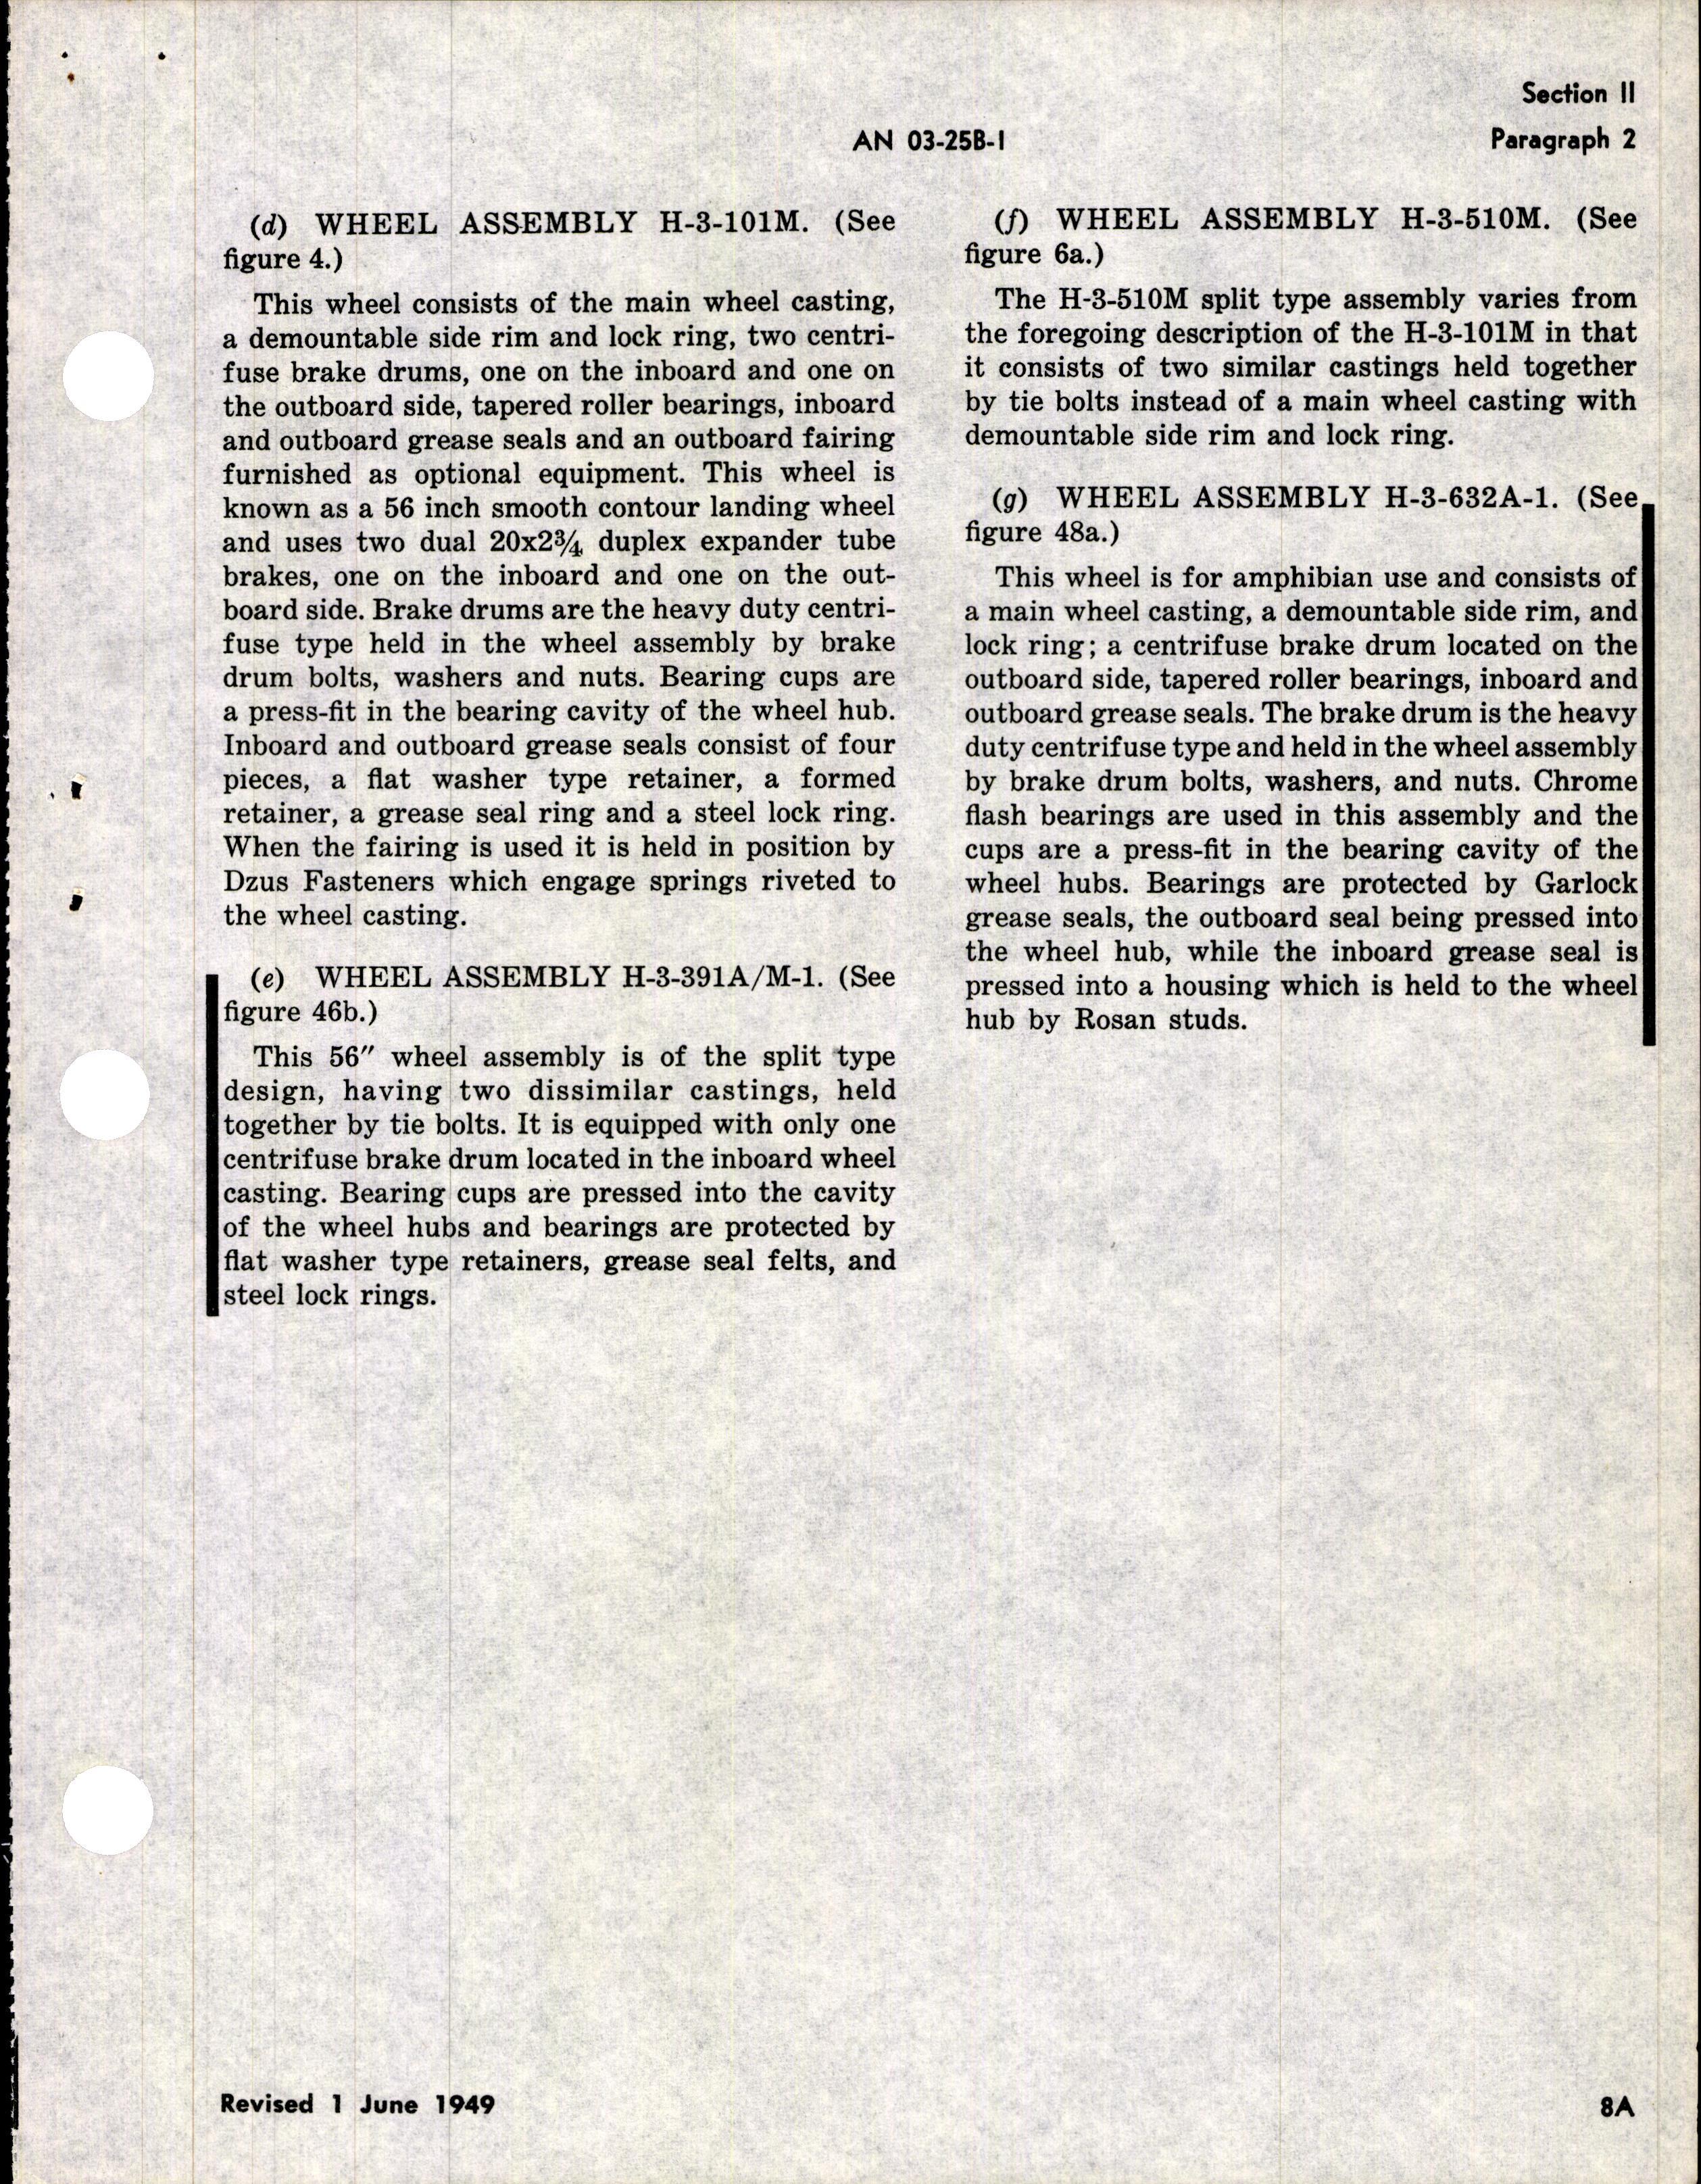 Sample page 5 from AirCorps Library document: Operation, Service, & Overhaul Instructions with Parts Catalog for Main Landing Wheels